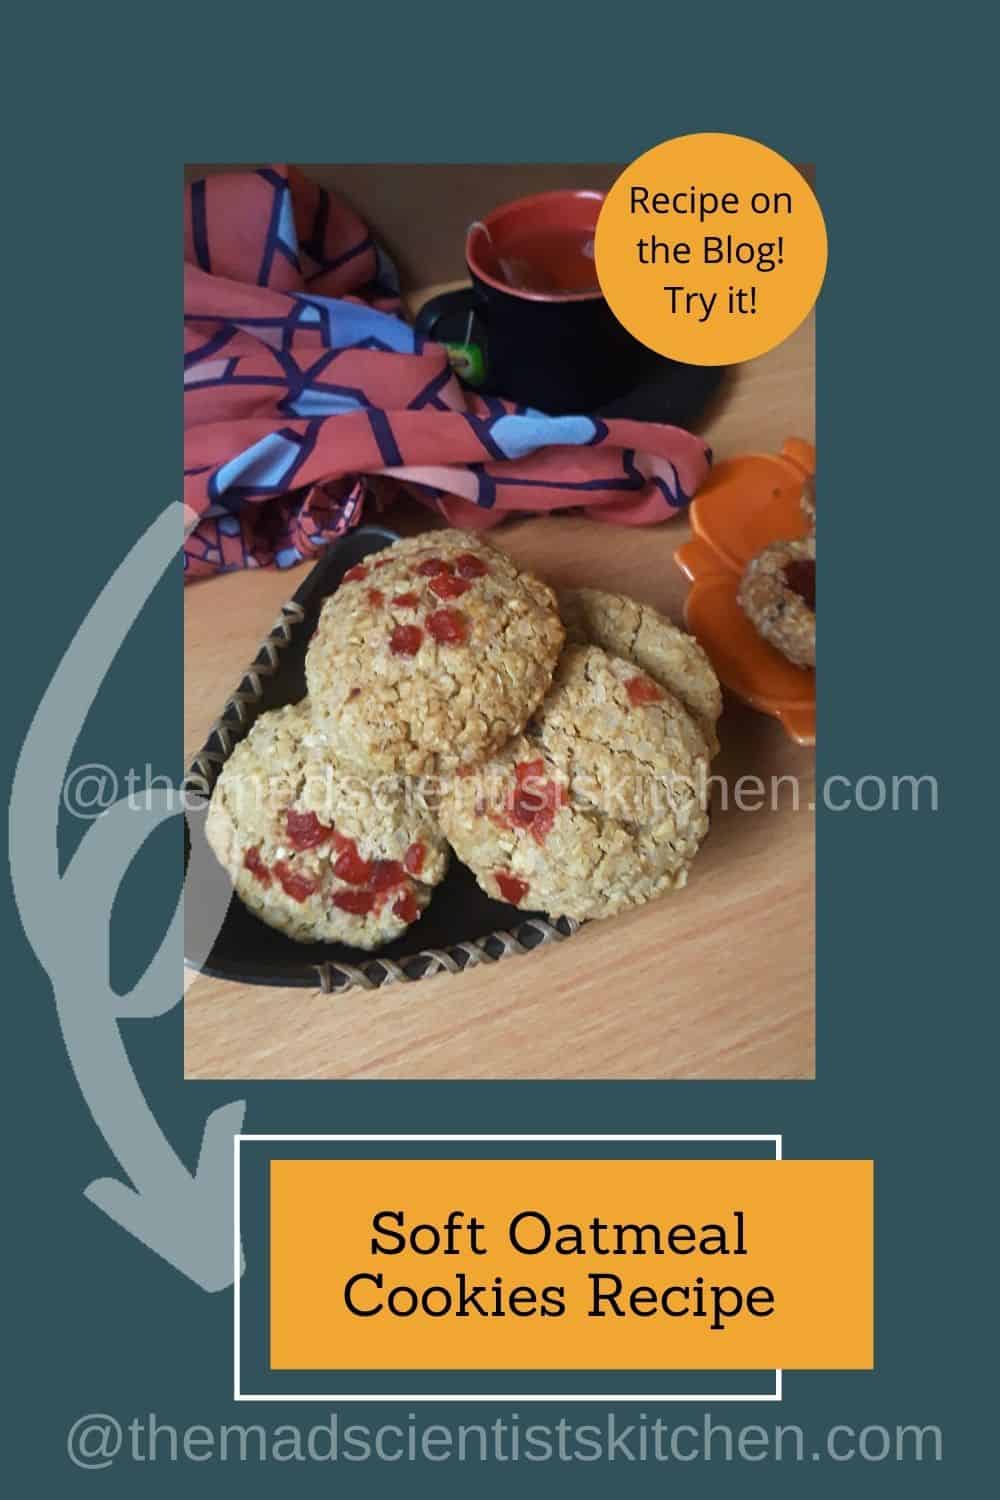 Soft Oatmeal Cookies Recipe, Easy And Delicious